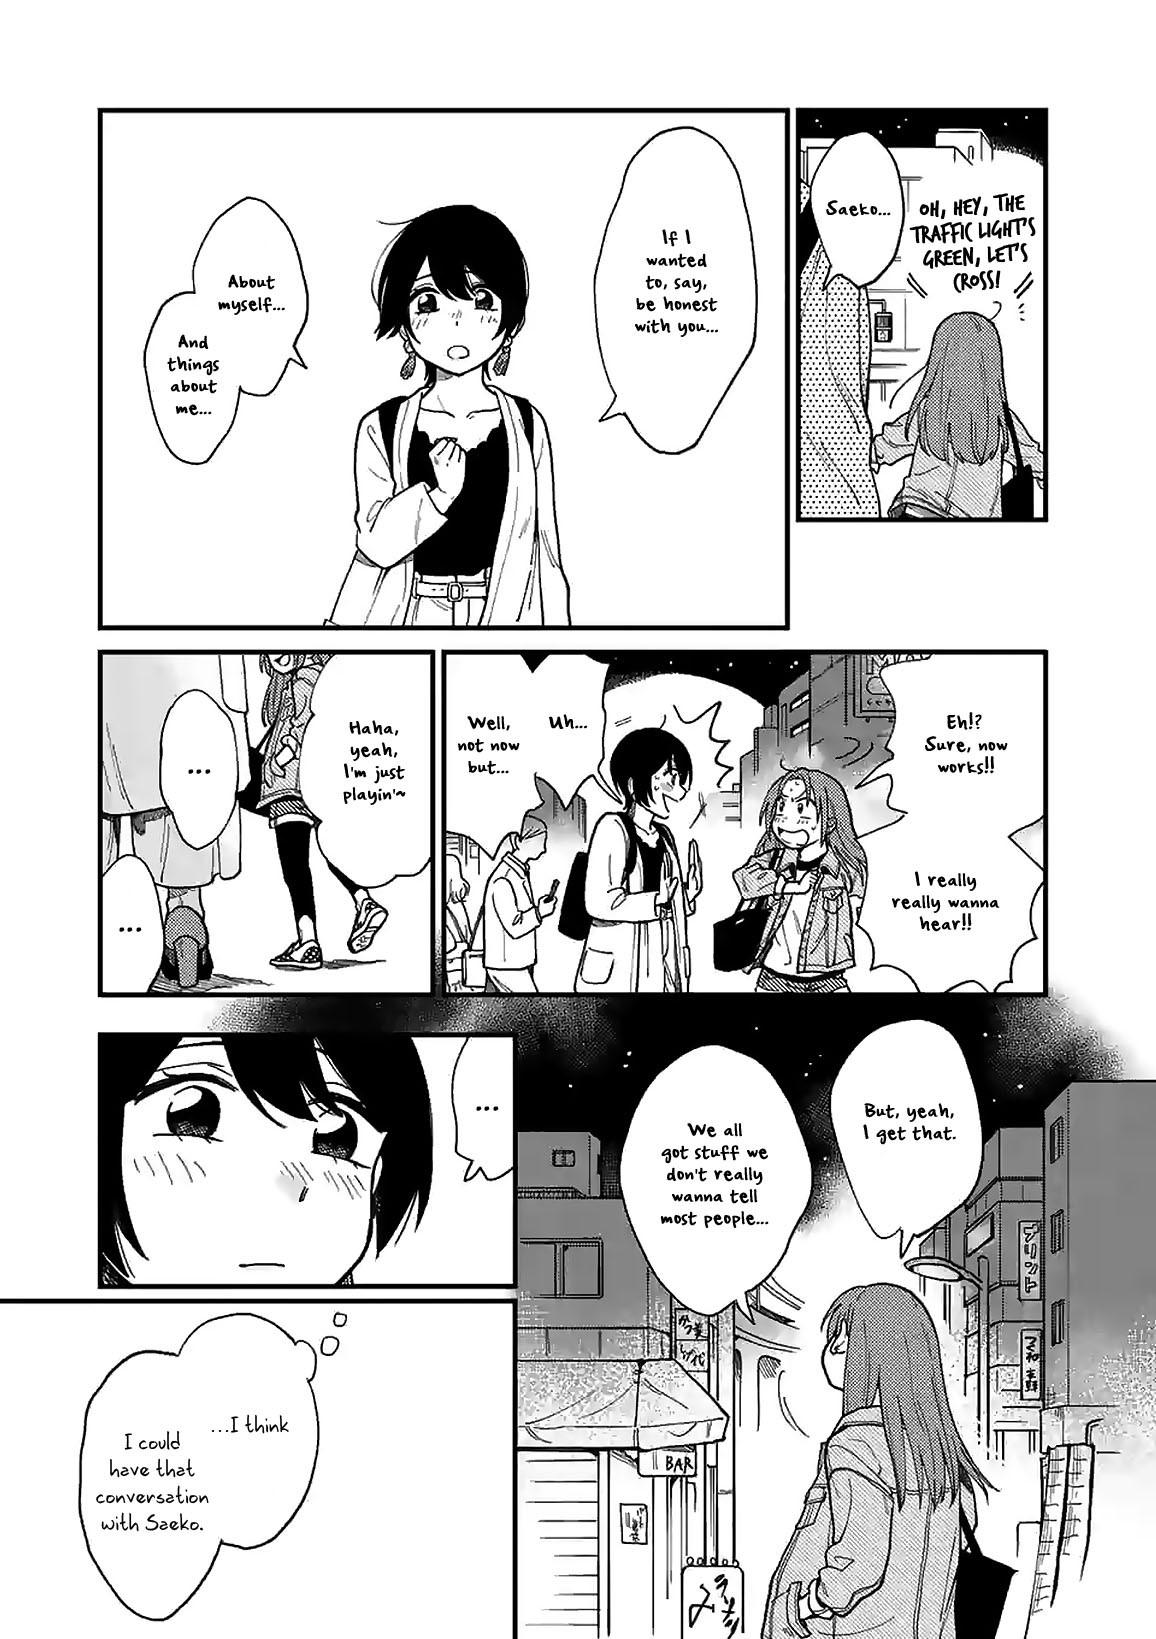 So, Do You Want To Go Out, Or? Ch. 1